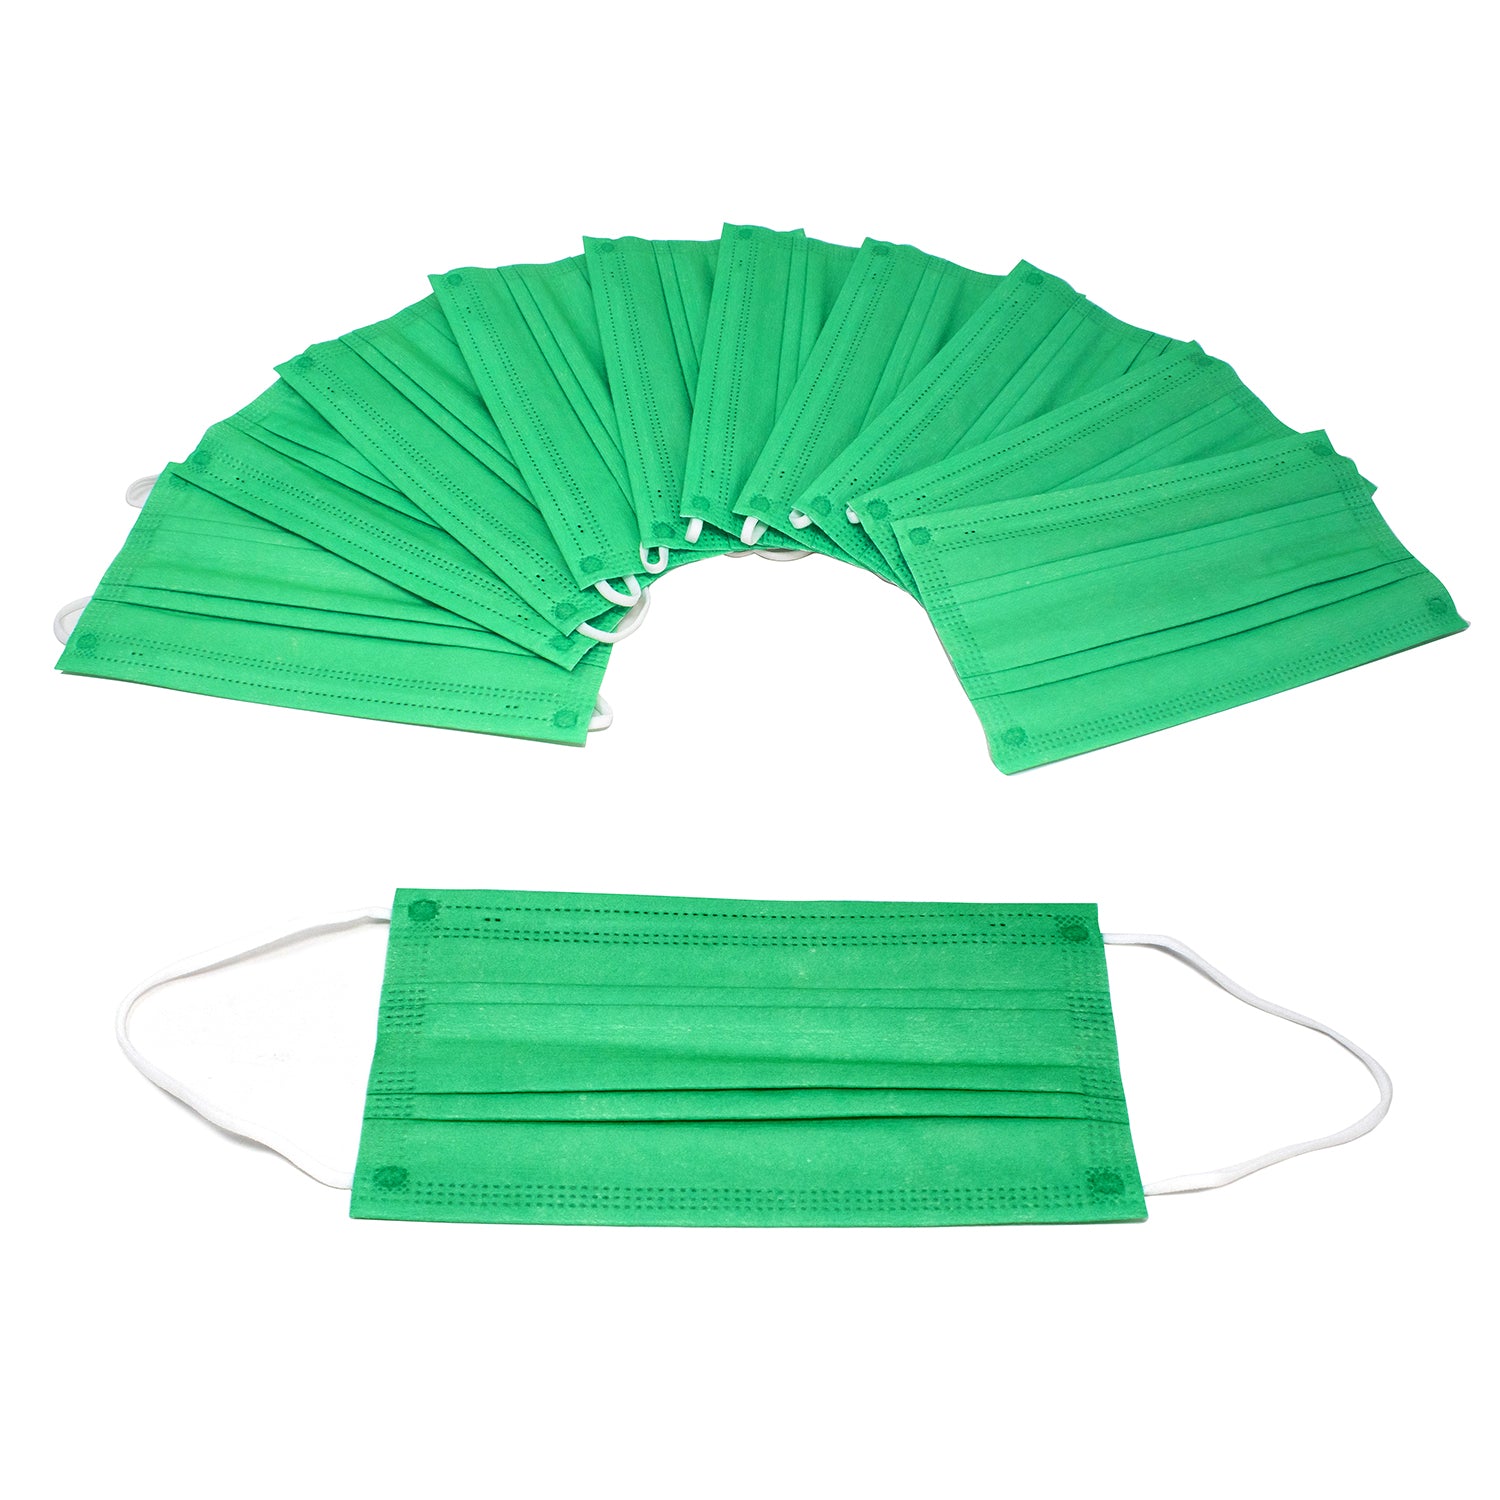 Disposable Solid Color Masks 10 Pack. With a variety of solid colors, these masks are perfect for protecting yourself while keeping a sense of style. Colorful fabric surgical masks.